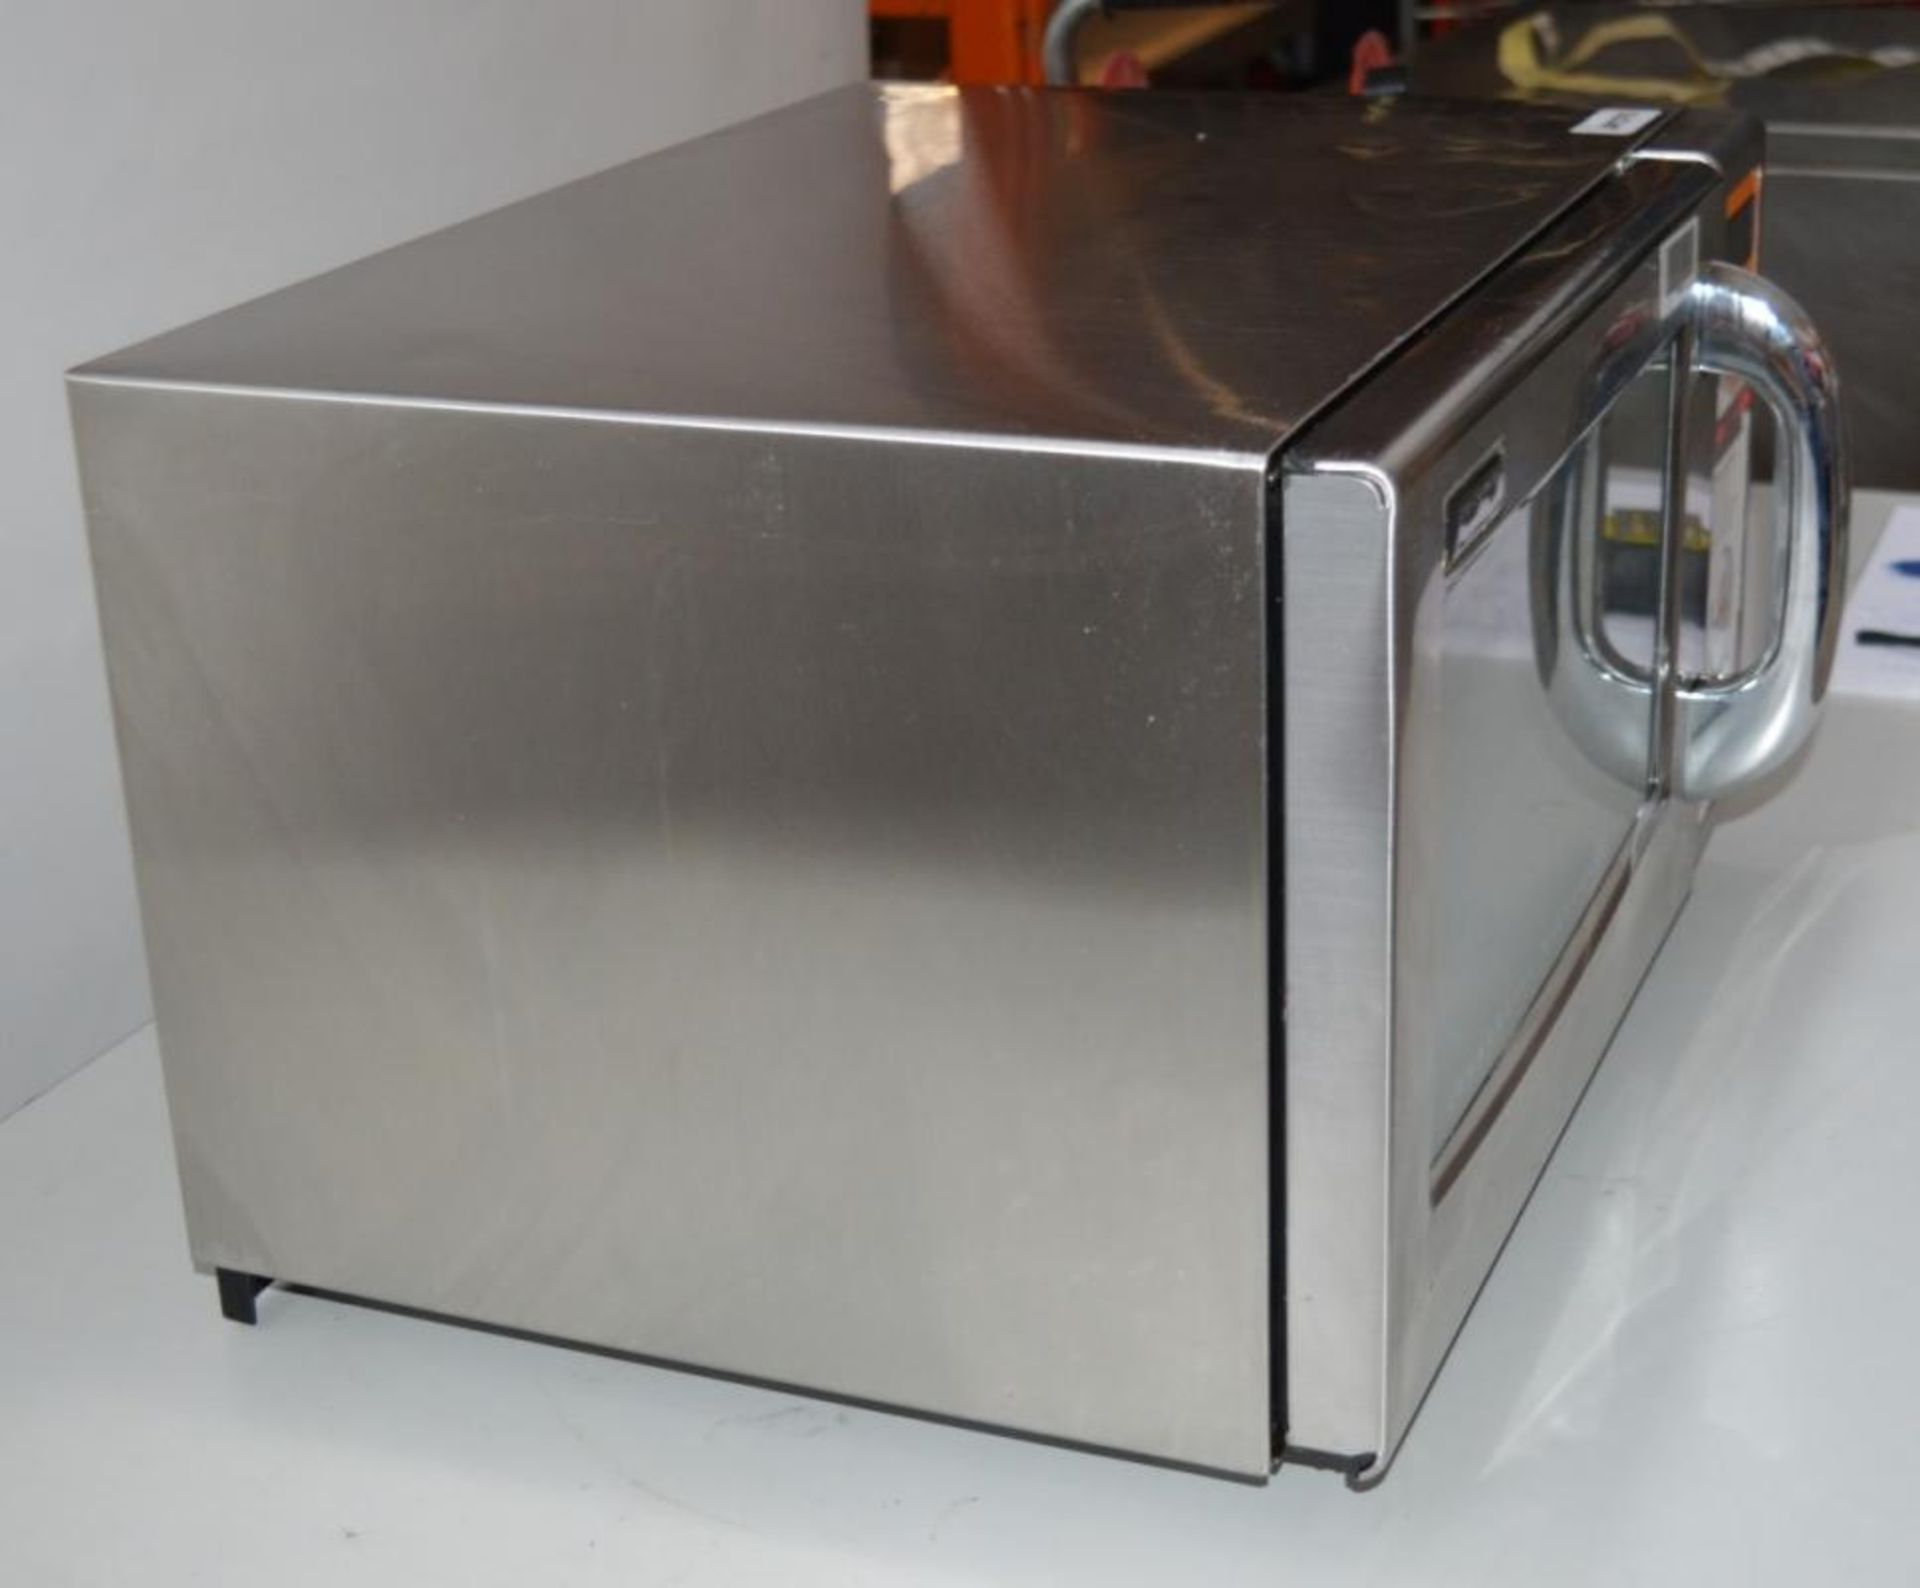 1 x iWave MiWAVE1000 Automated Foodservice Solution - Stainless Steel 1000w Catering Microwave - Image 2 of 14